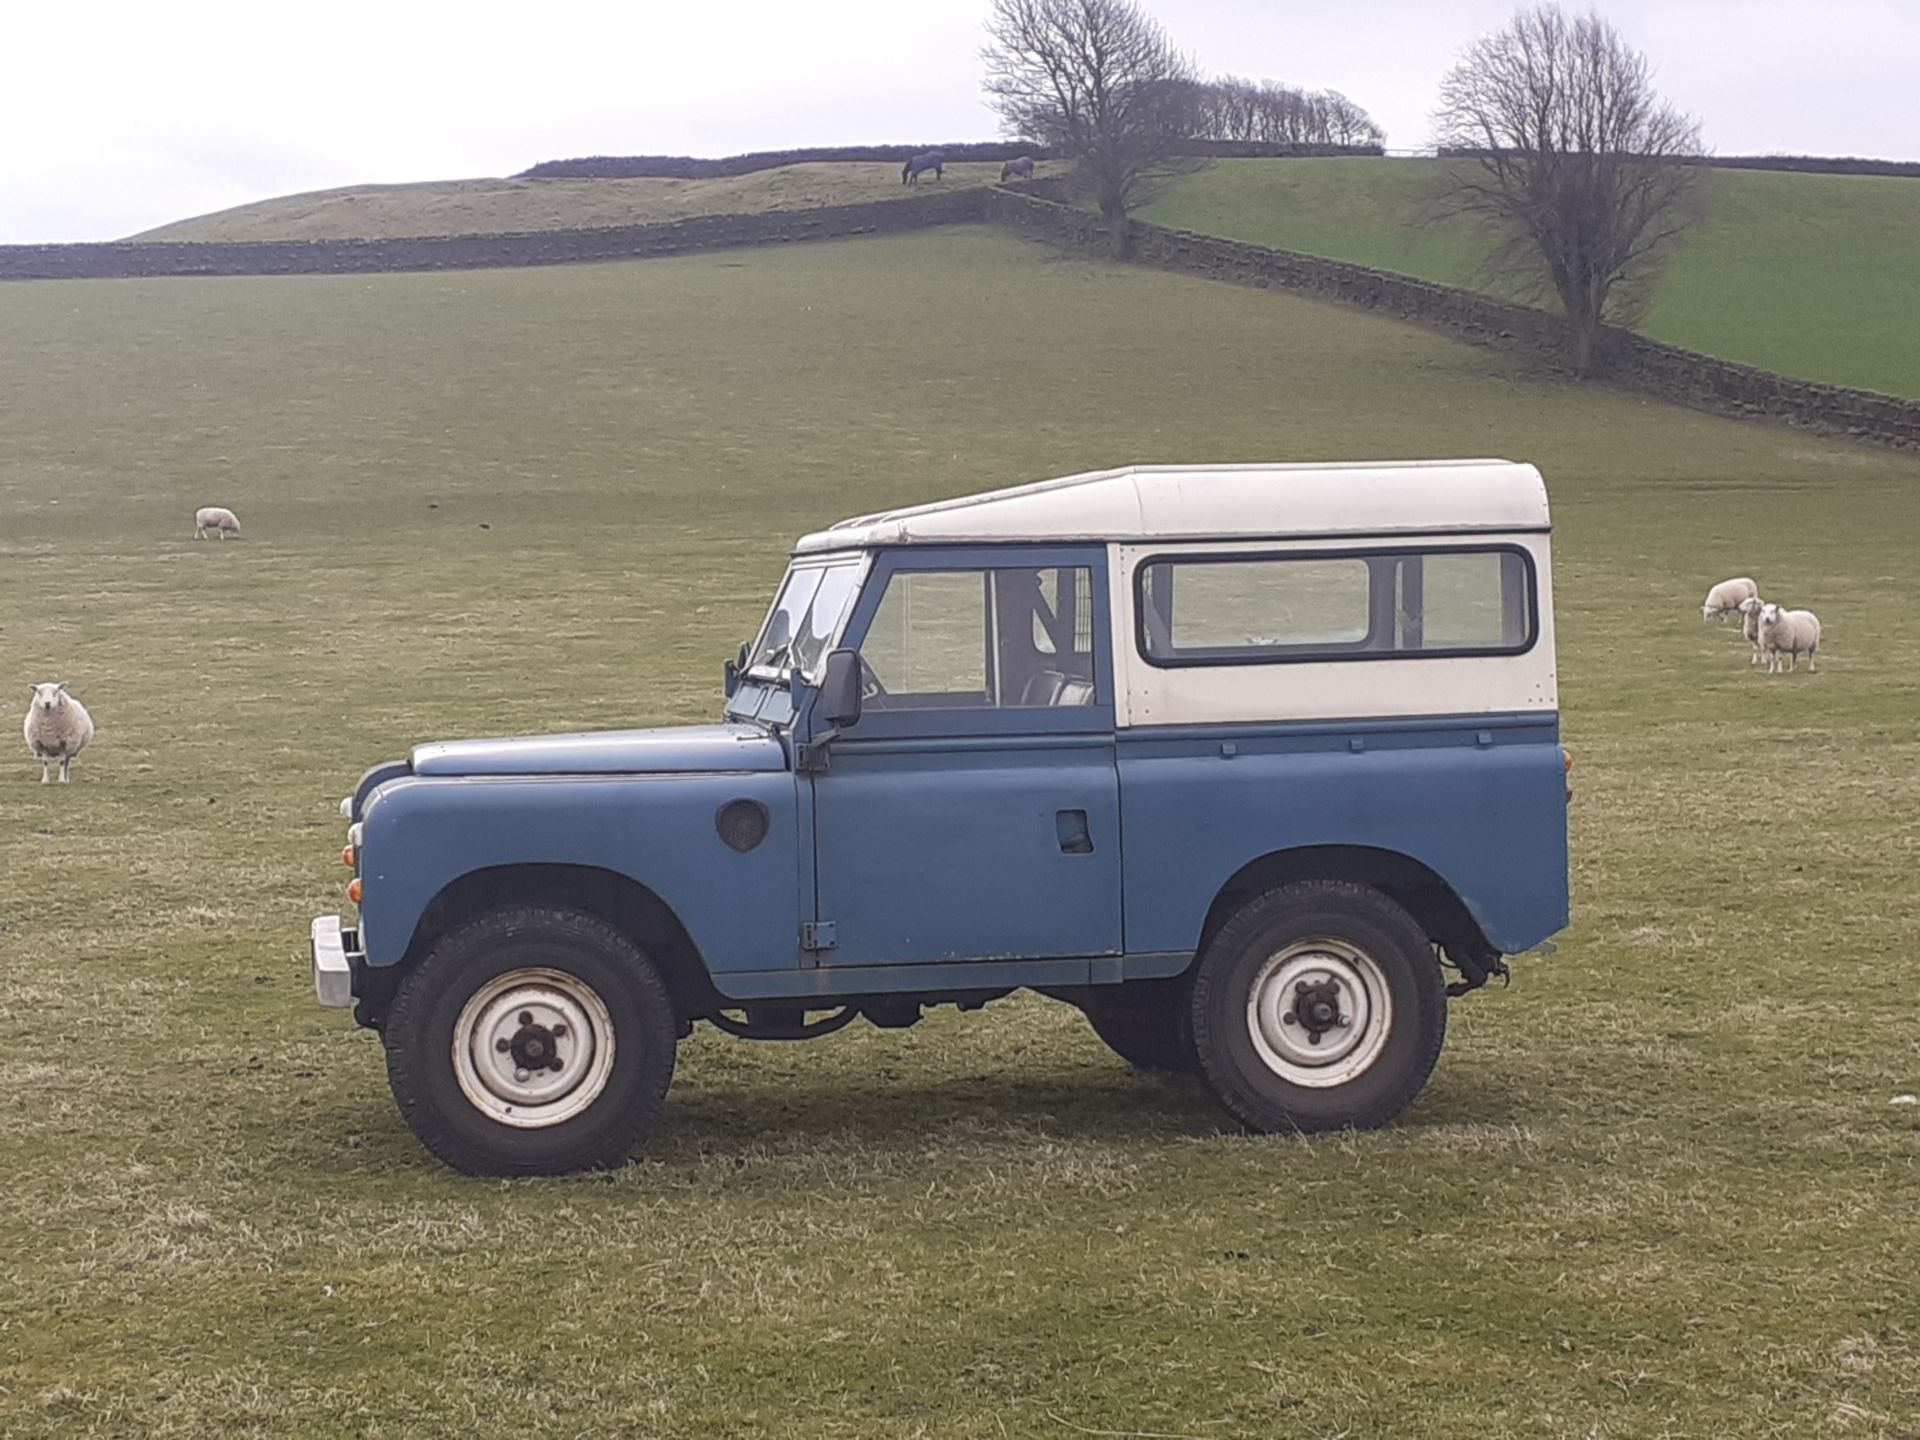 1972 LAND ROVER 88" - 4 CYL 2.5 DIESEL NATURALLY ASPIRATED, DRIVES AS IT SHOULD, WONDERFUL PATINA - Image 5 of 15